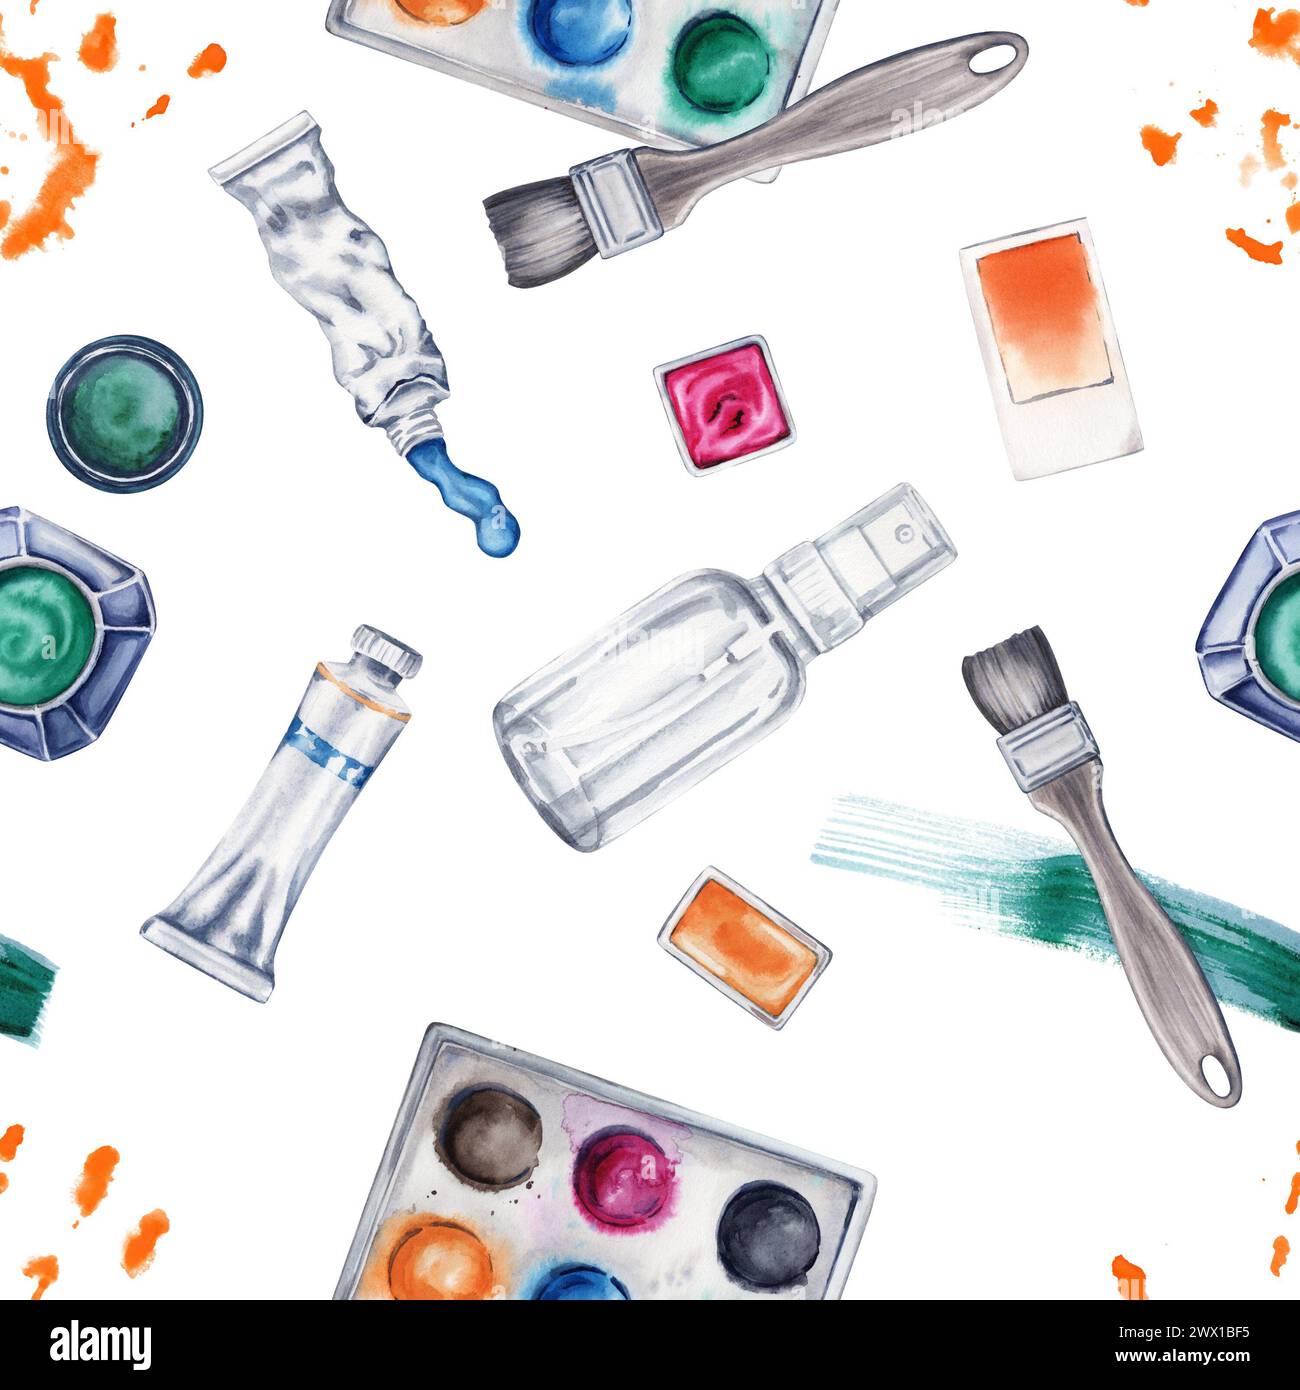 Art materials seamless pattern on white  background. Brushes and paint tubes watercolor illustration. Ink bottle with spray bottle elements. Stock Photo